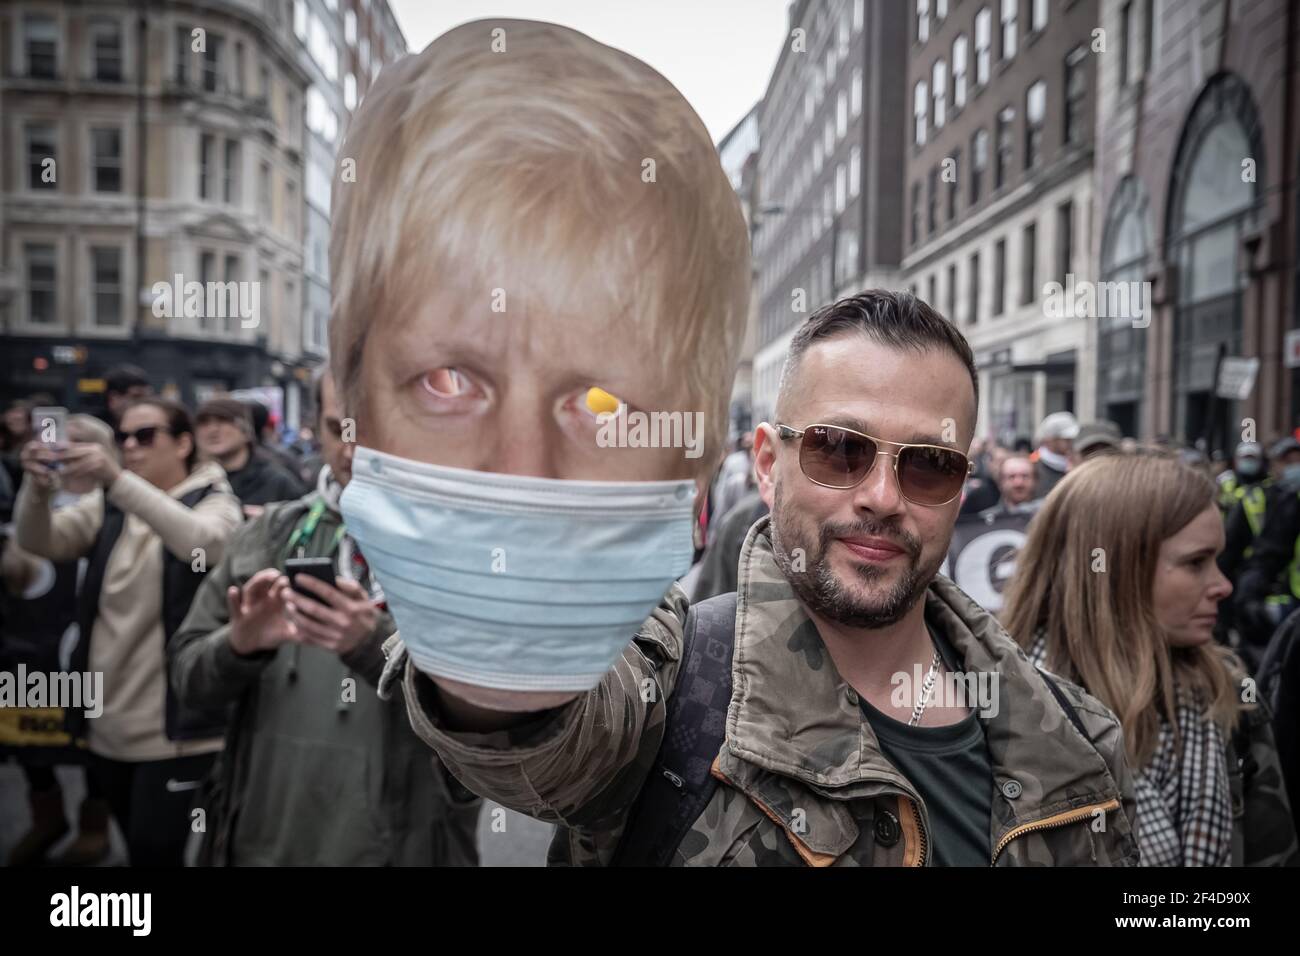 London, UK. 20th March, 2021. Coronavirus: Thousands of anti-lockdown demonstrators march under heavy police surveillance from Hyde Park to Westminster. Credit: Guy Corbishley/Alamy Live News Stock Photo